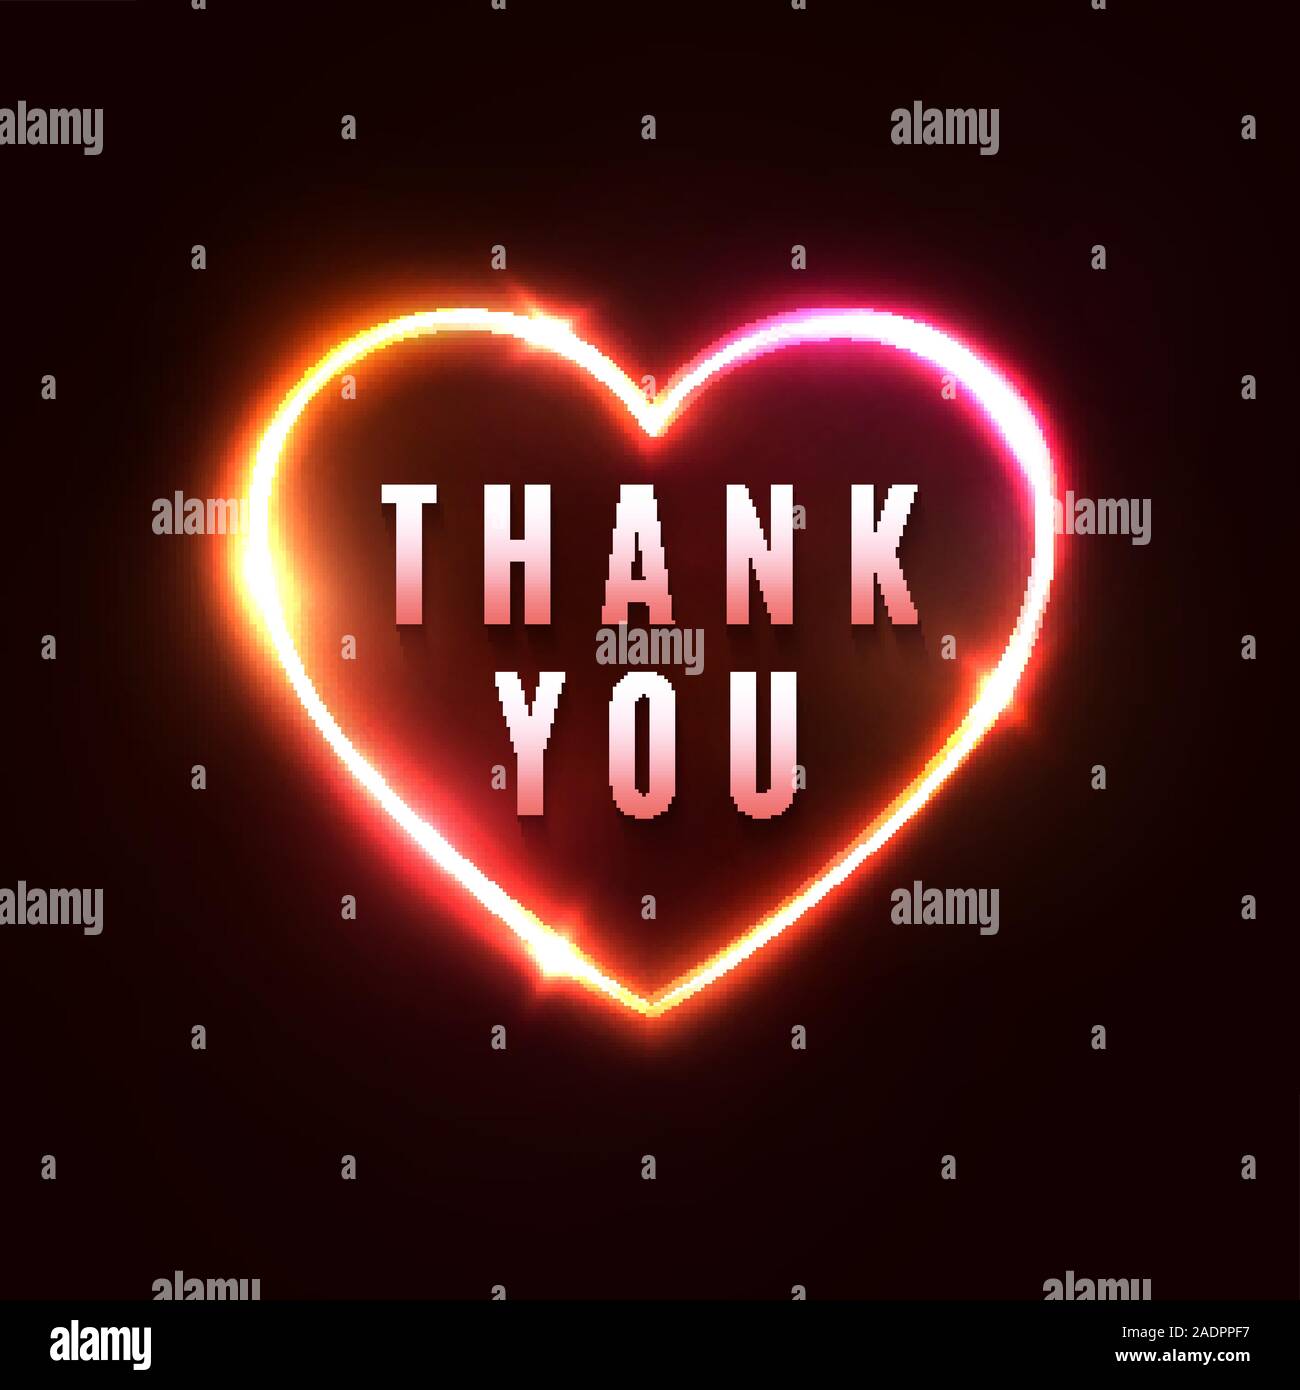 Thank you background. 3d realistic heart shape neon light sign and glowing thankful letters star sparkle. Shining frame on dark red background. Night Stock Vector